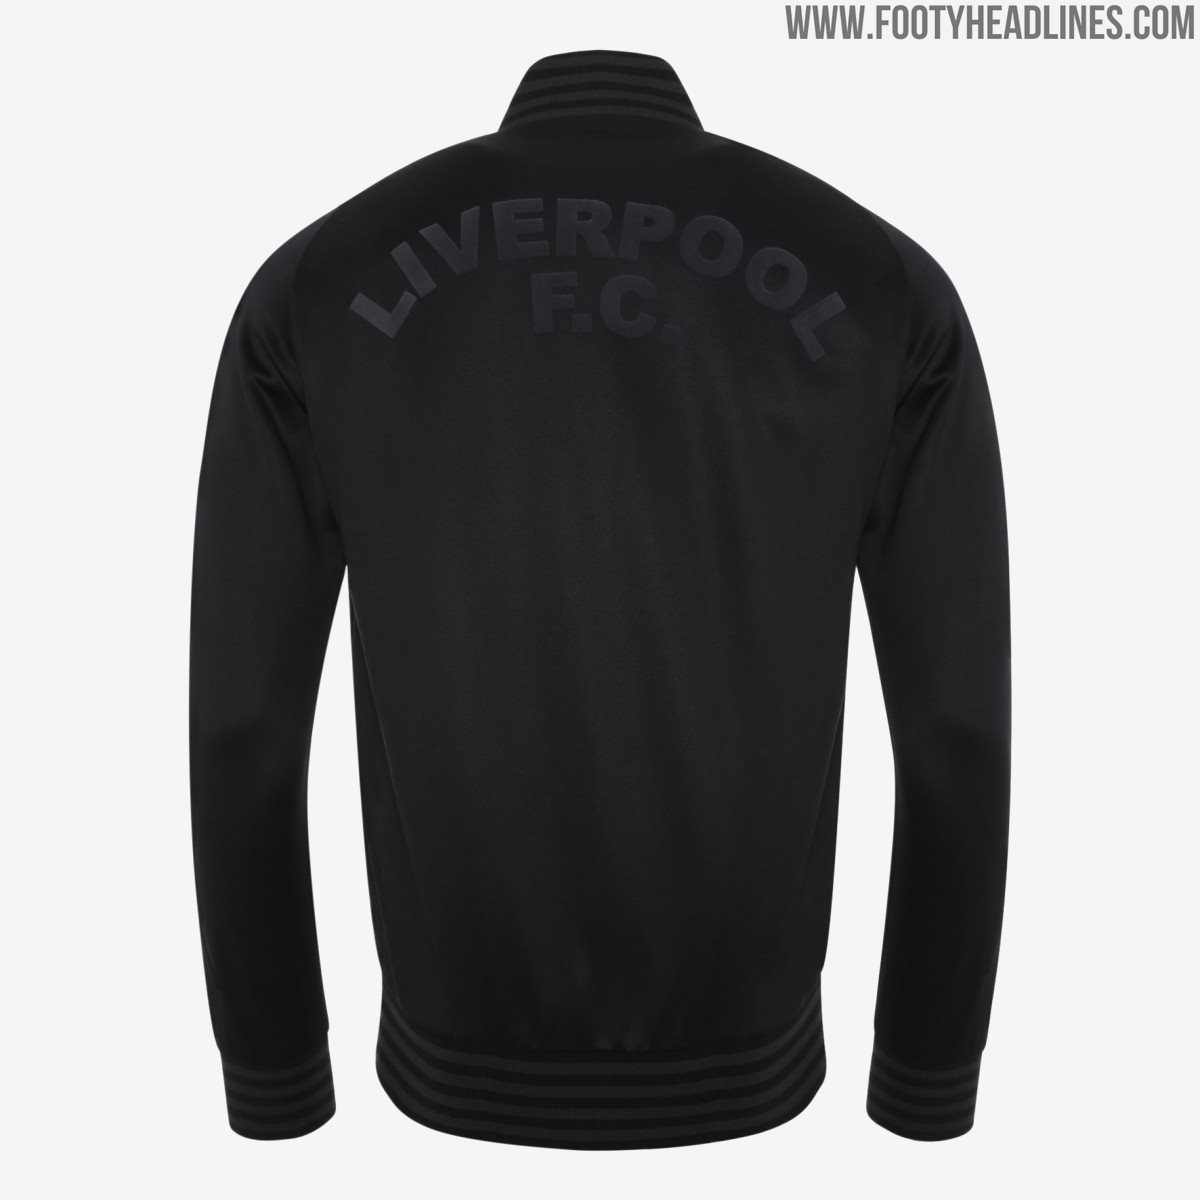 Stunning Blackout Liverpool FC 19-20 Shankly Jacket Released - Footy ...